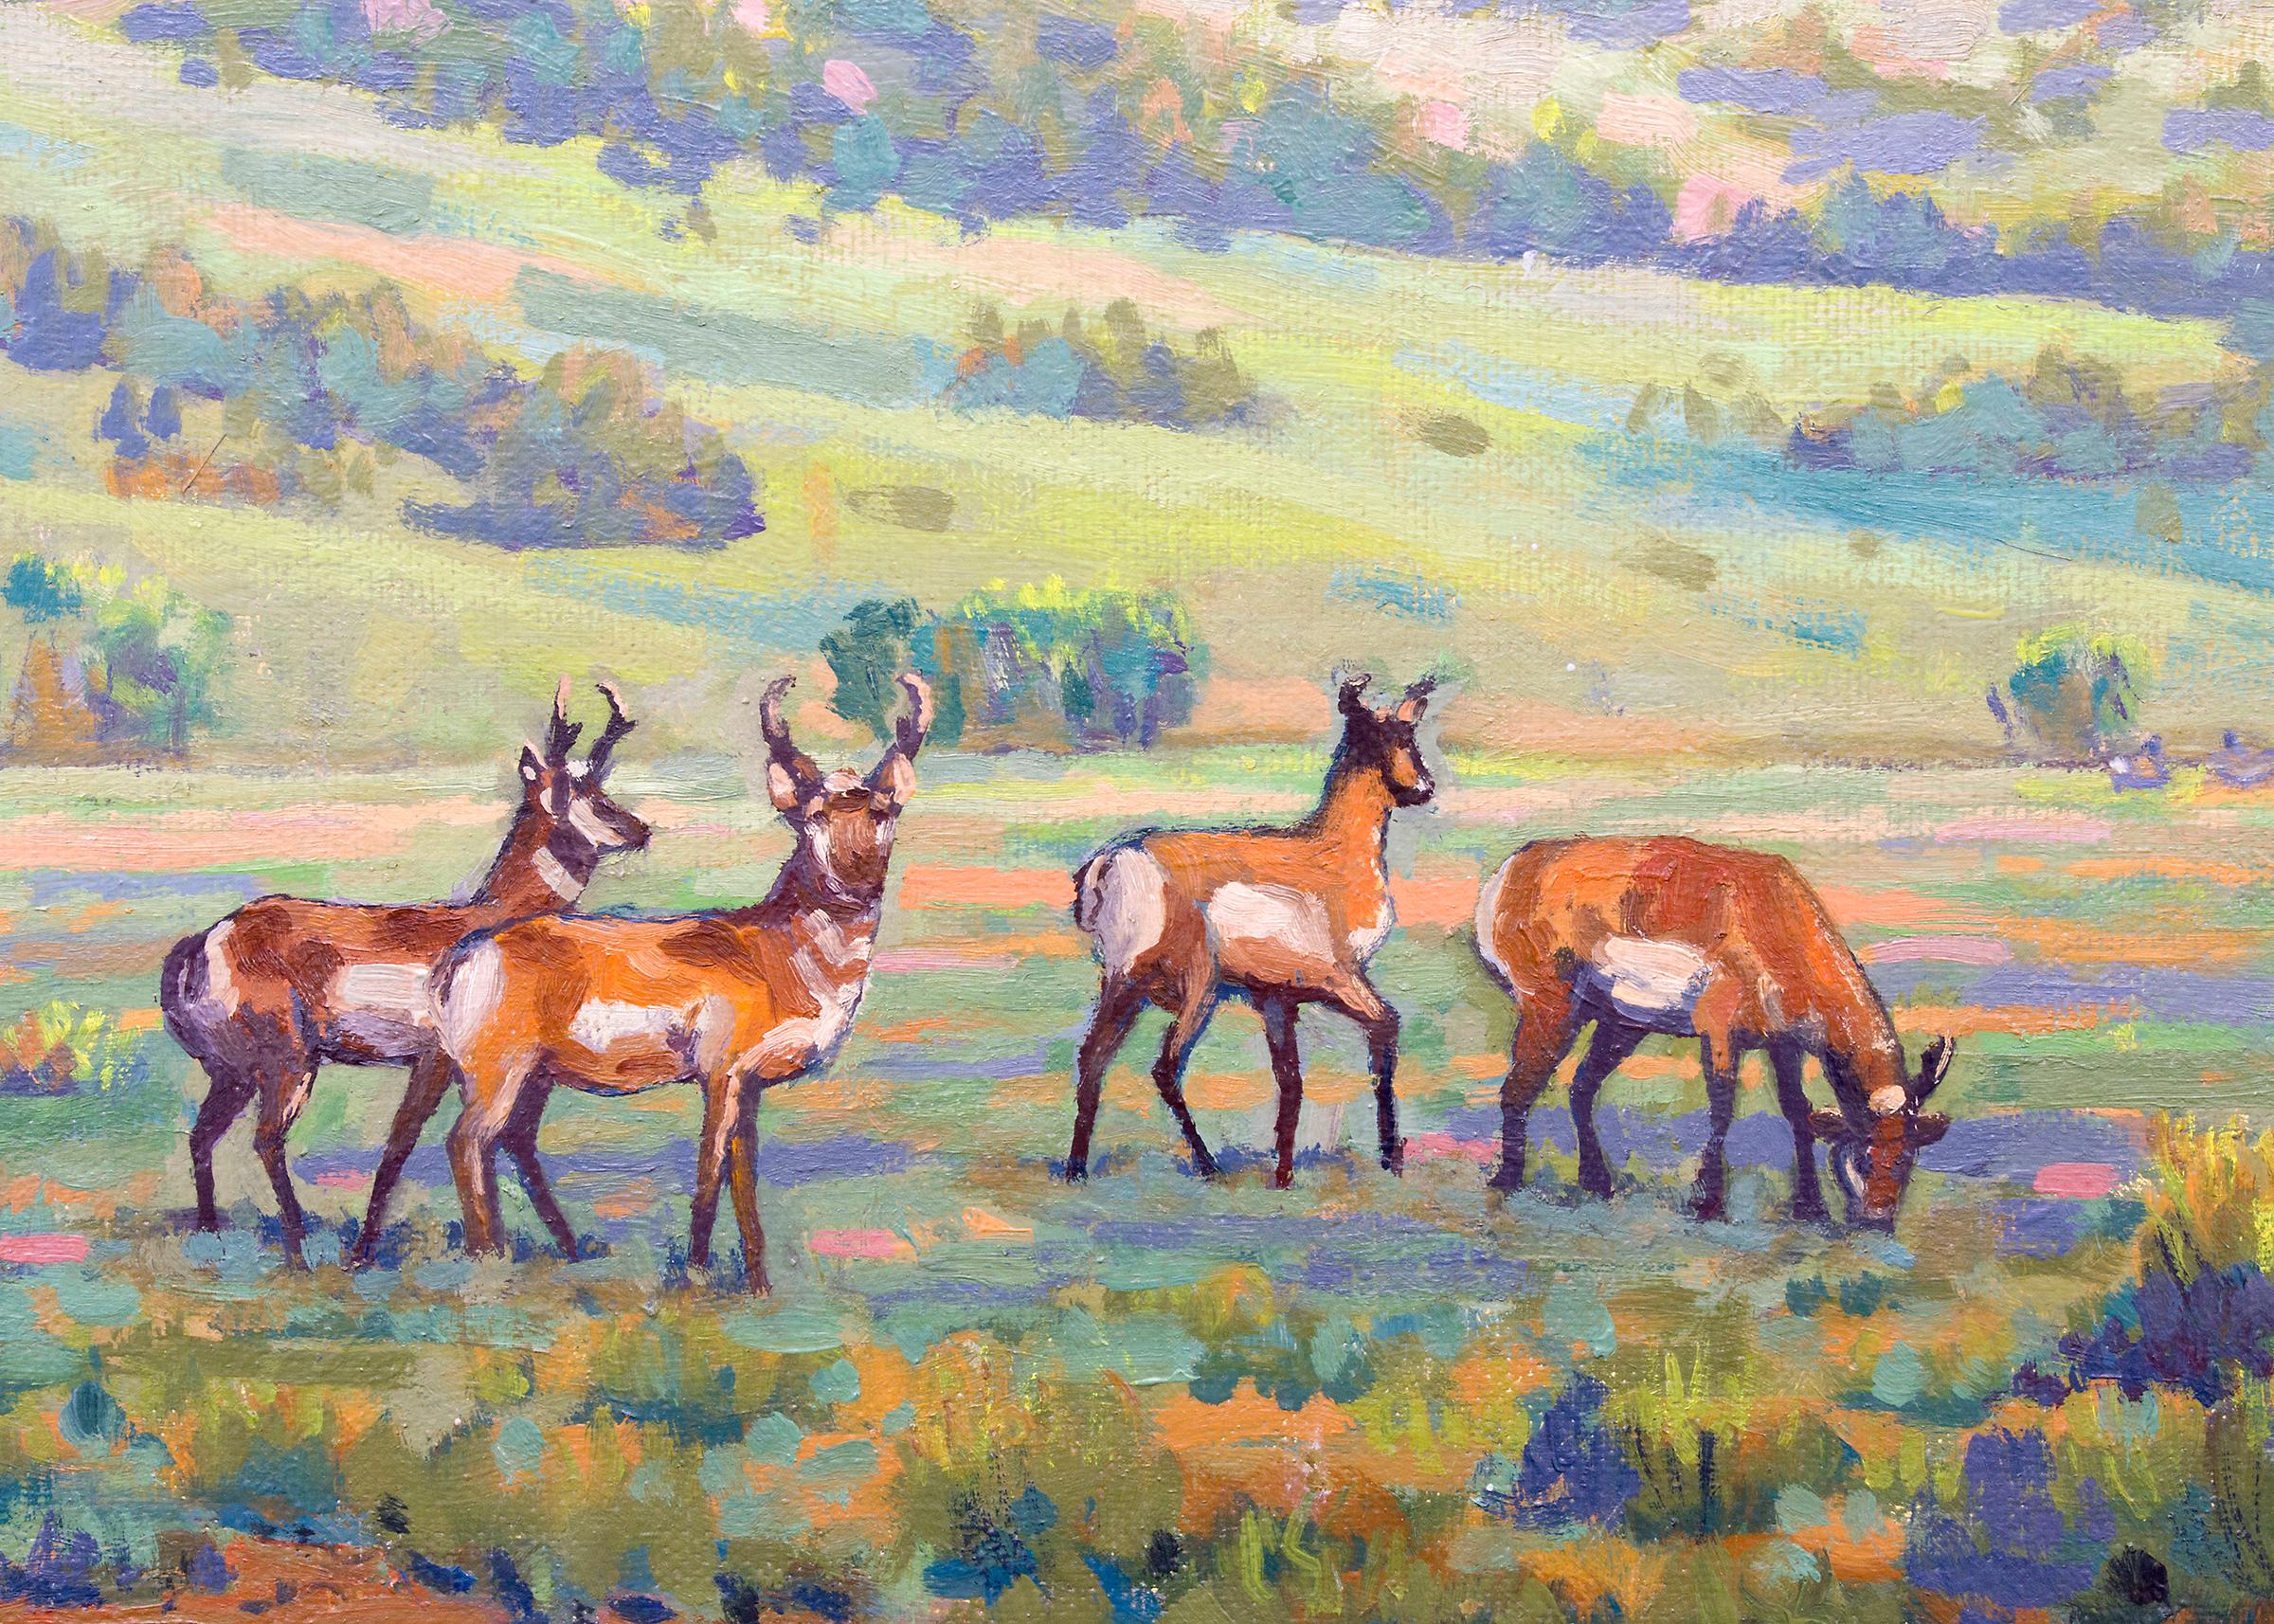 Antelope, Colorado Mountain Landscape Oil Painting, Animals Grazing, Green Blue - Gray Landscape Painting by Harold Vincent Skene